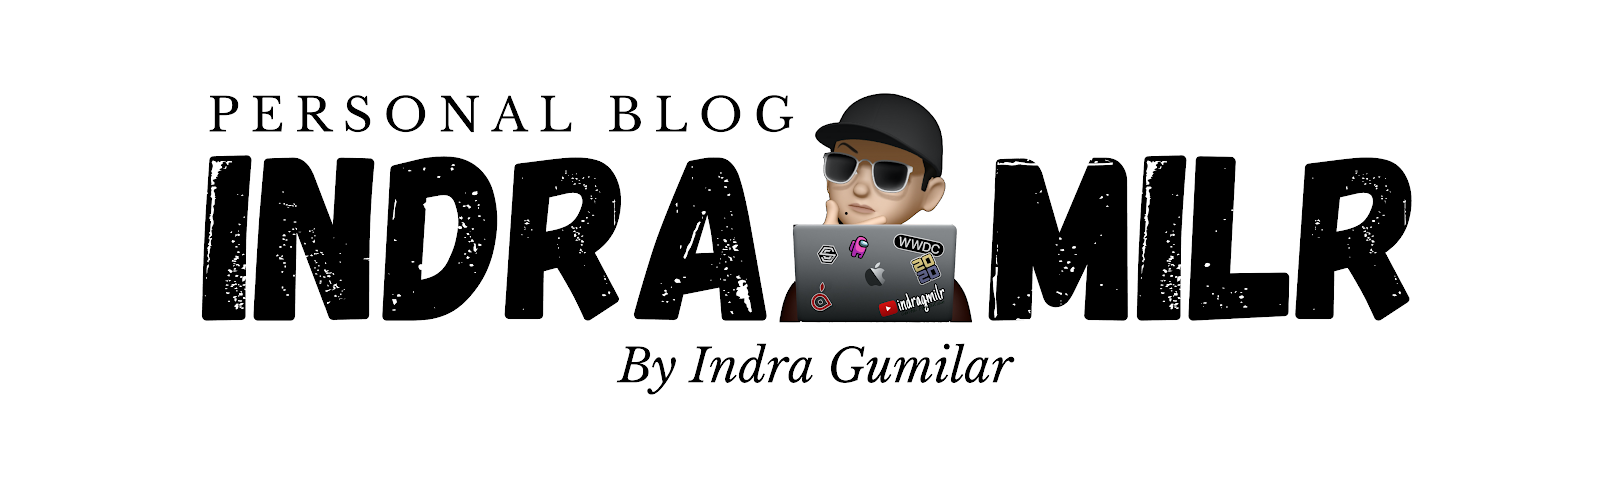 Indra's Personal Blog